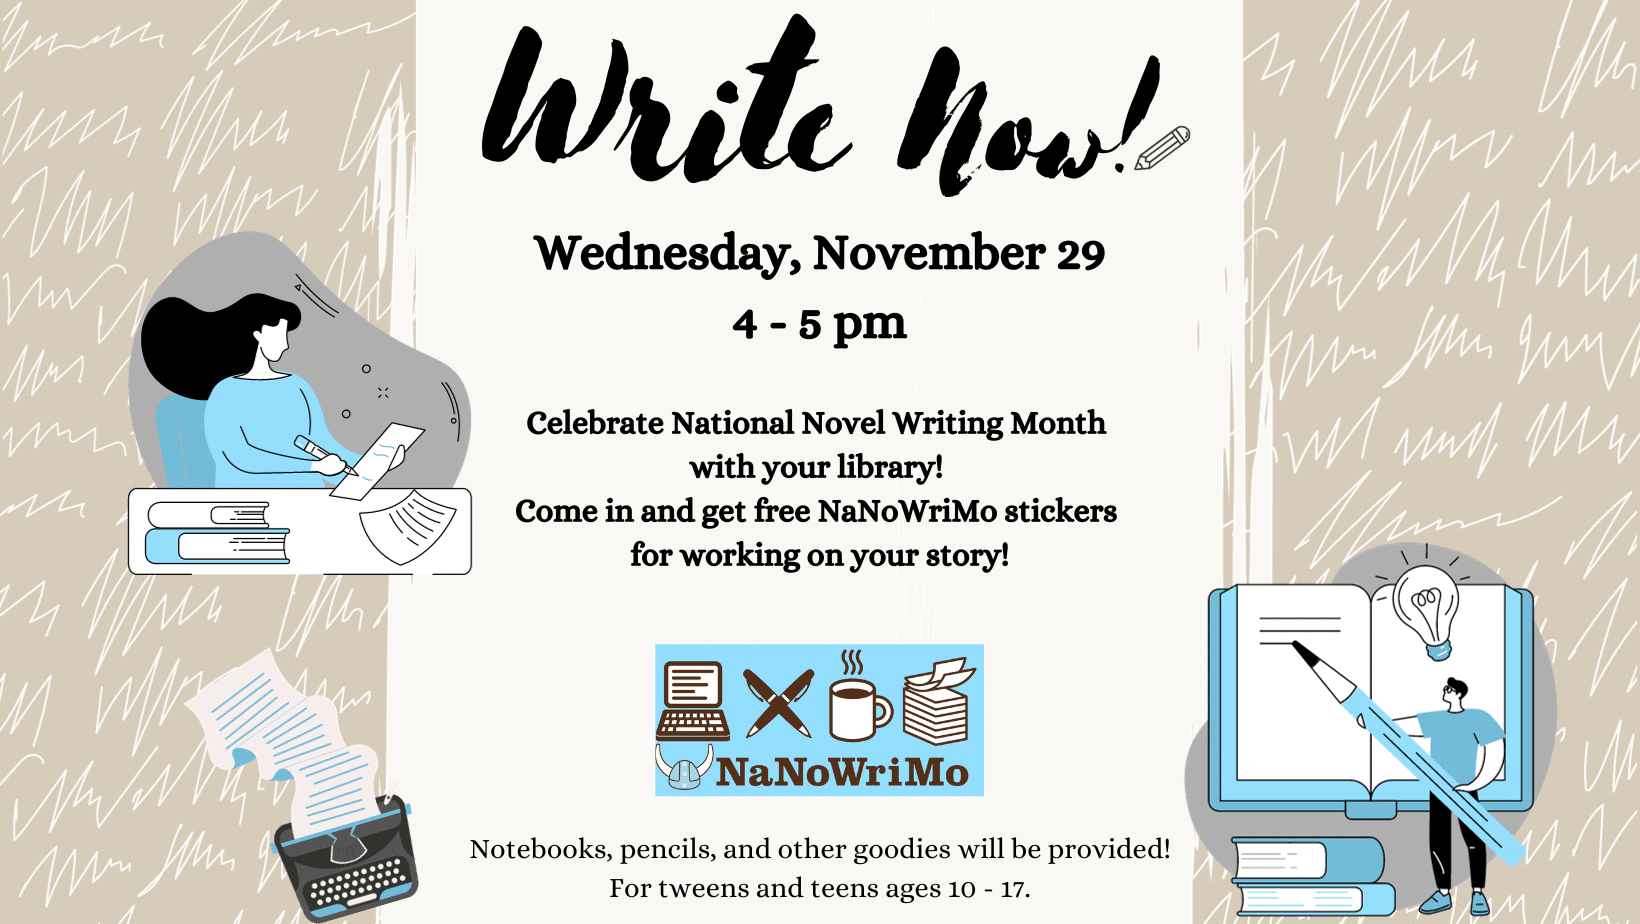 Write Now, Wednesday, November 29 at 4:00 pm